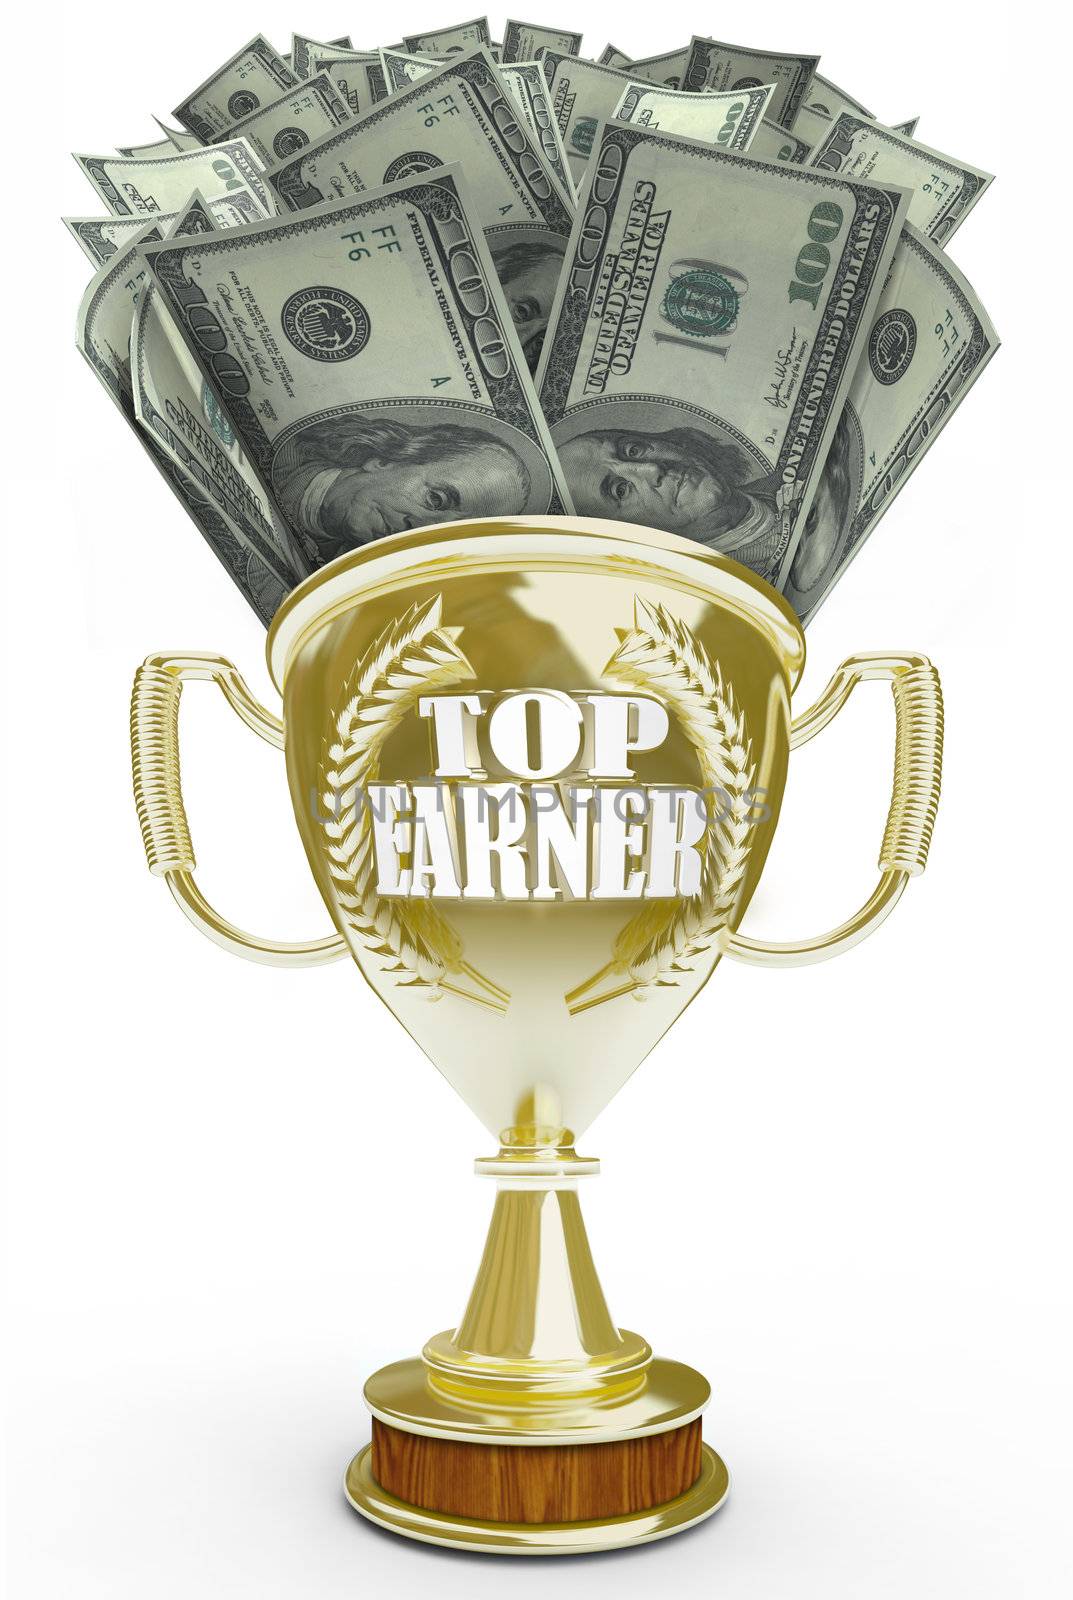 A golden trophy with the words Top Earner and cash overflowing from the top